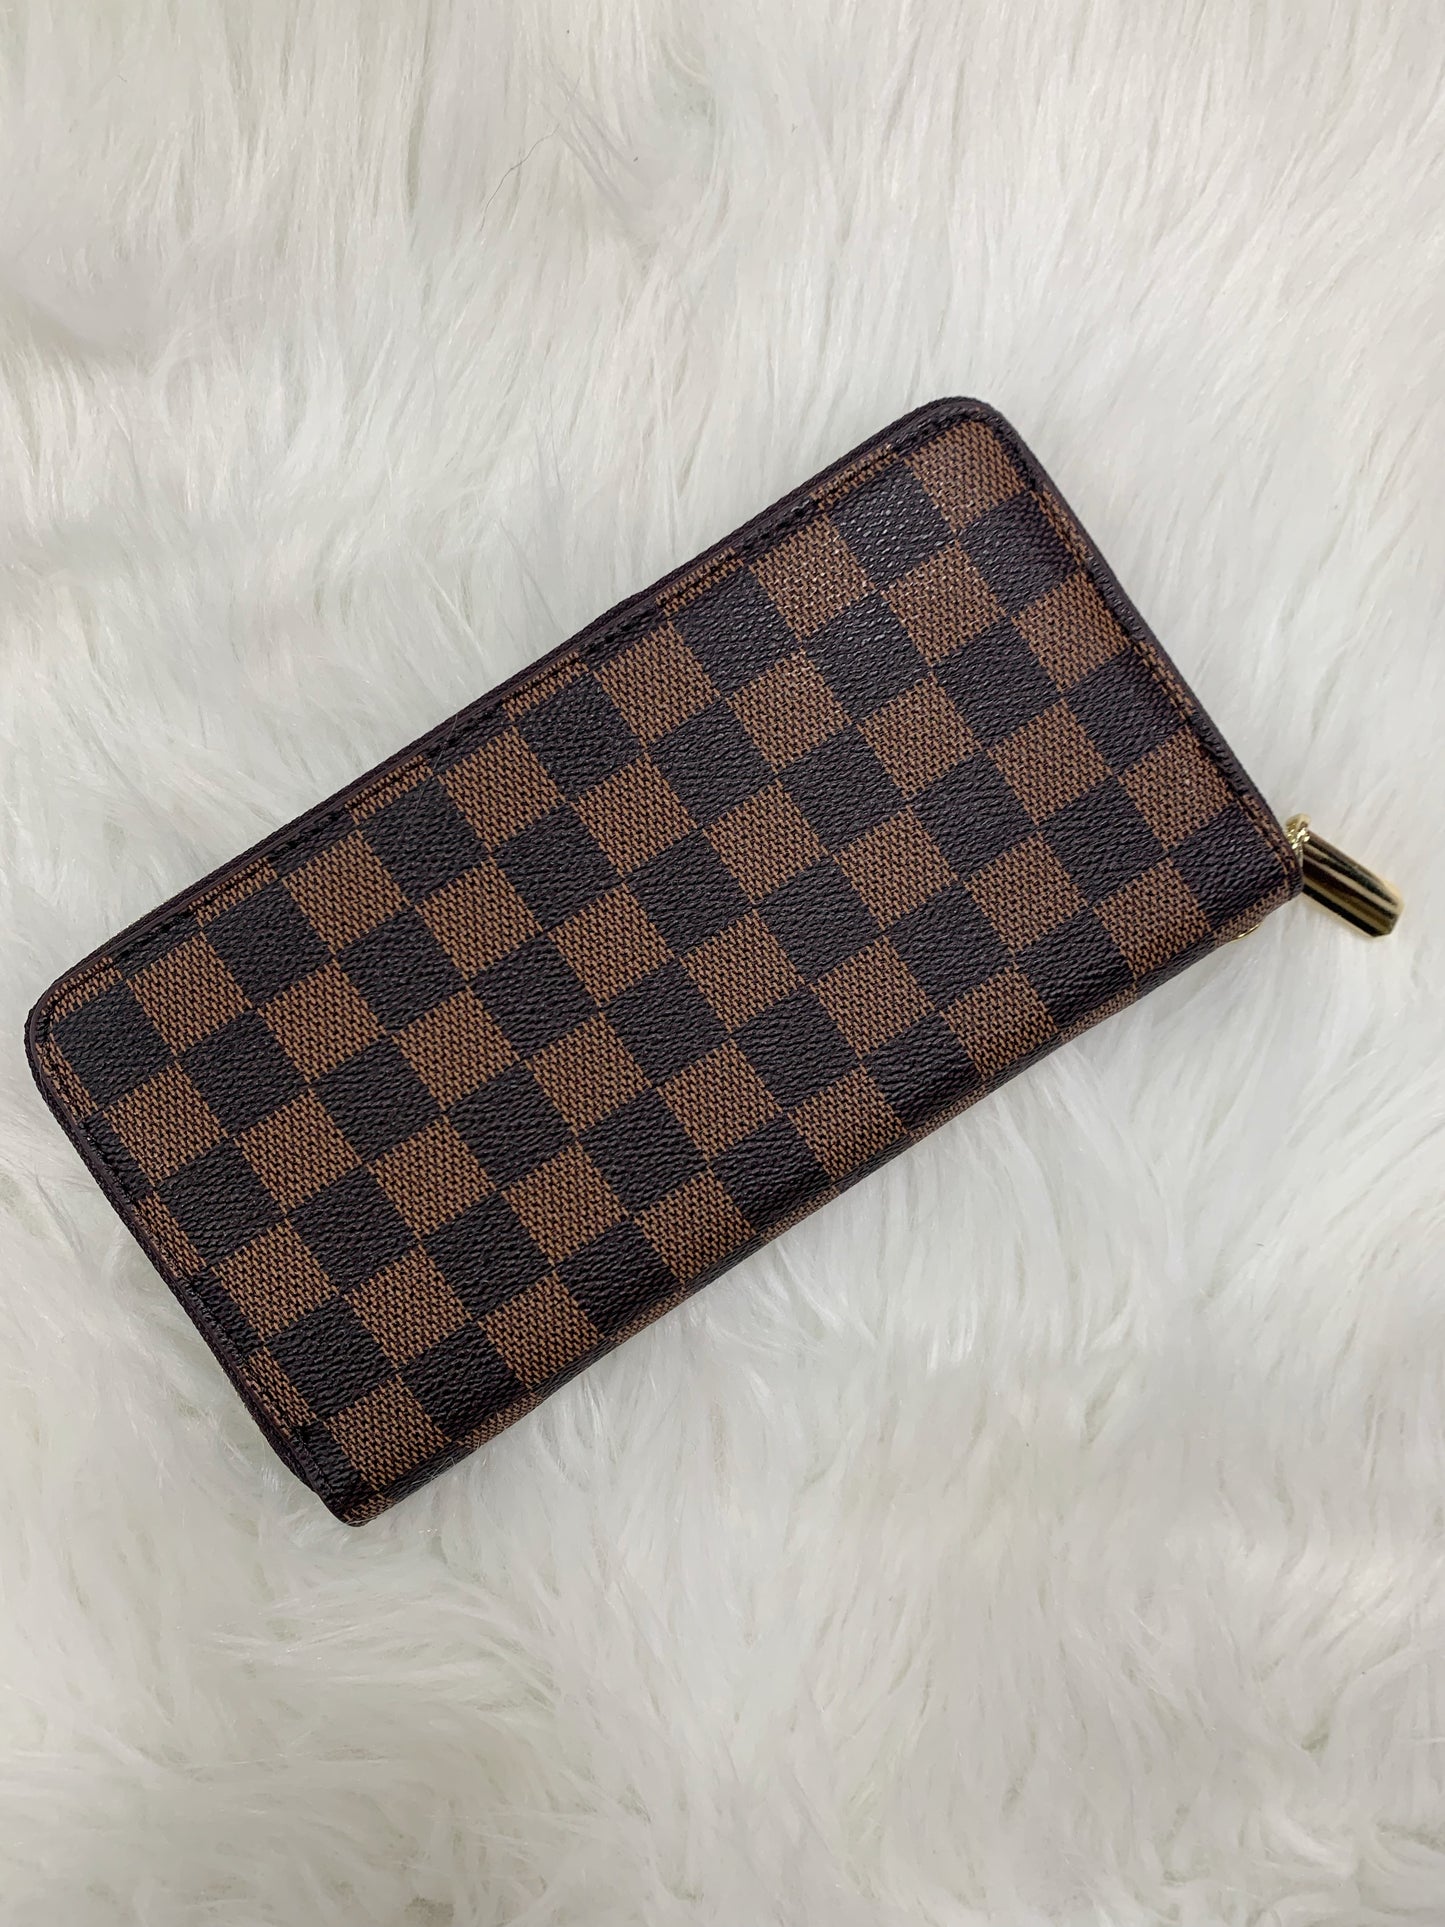 Tory Checkered Wristlet Wallet